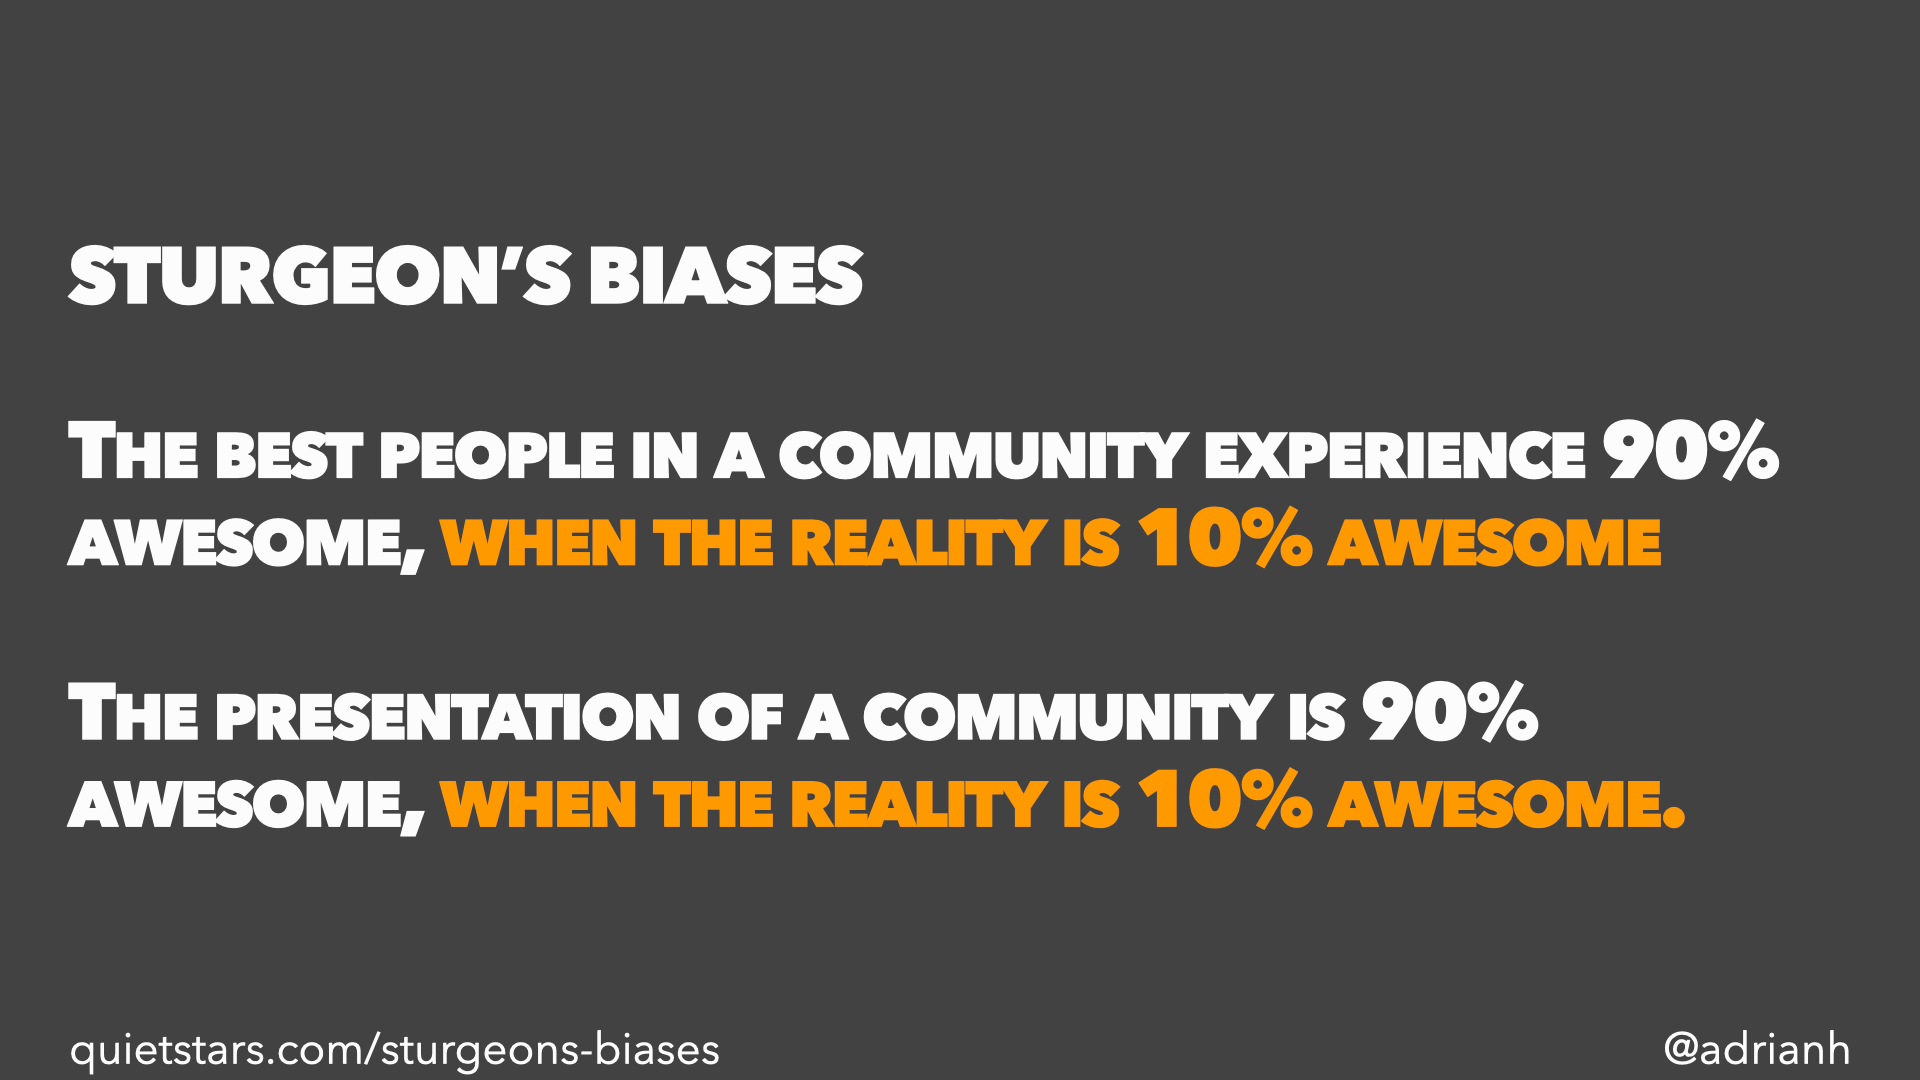 Sturgeon’s Biases: The best people in a community experience 90% awesome, when the reality is 10% awesome. The presentation of a community is 90% awesome, when the reality is 10% awesome.